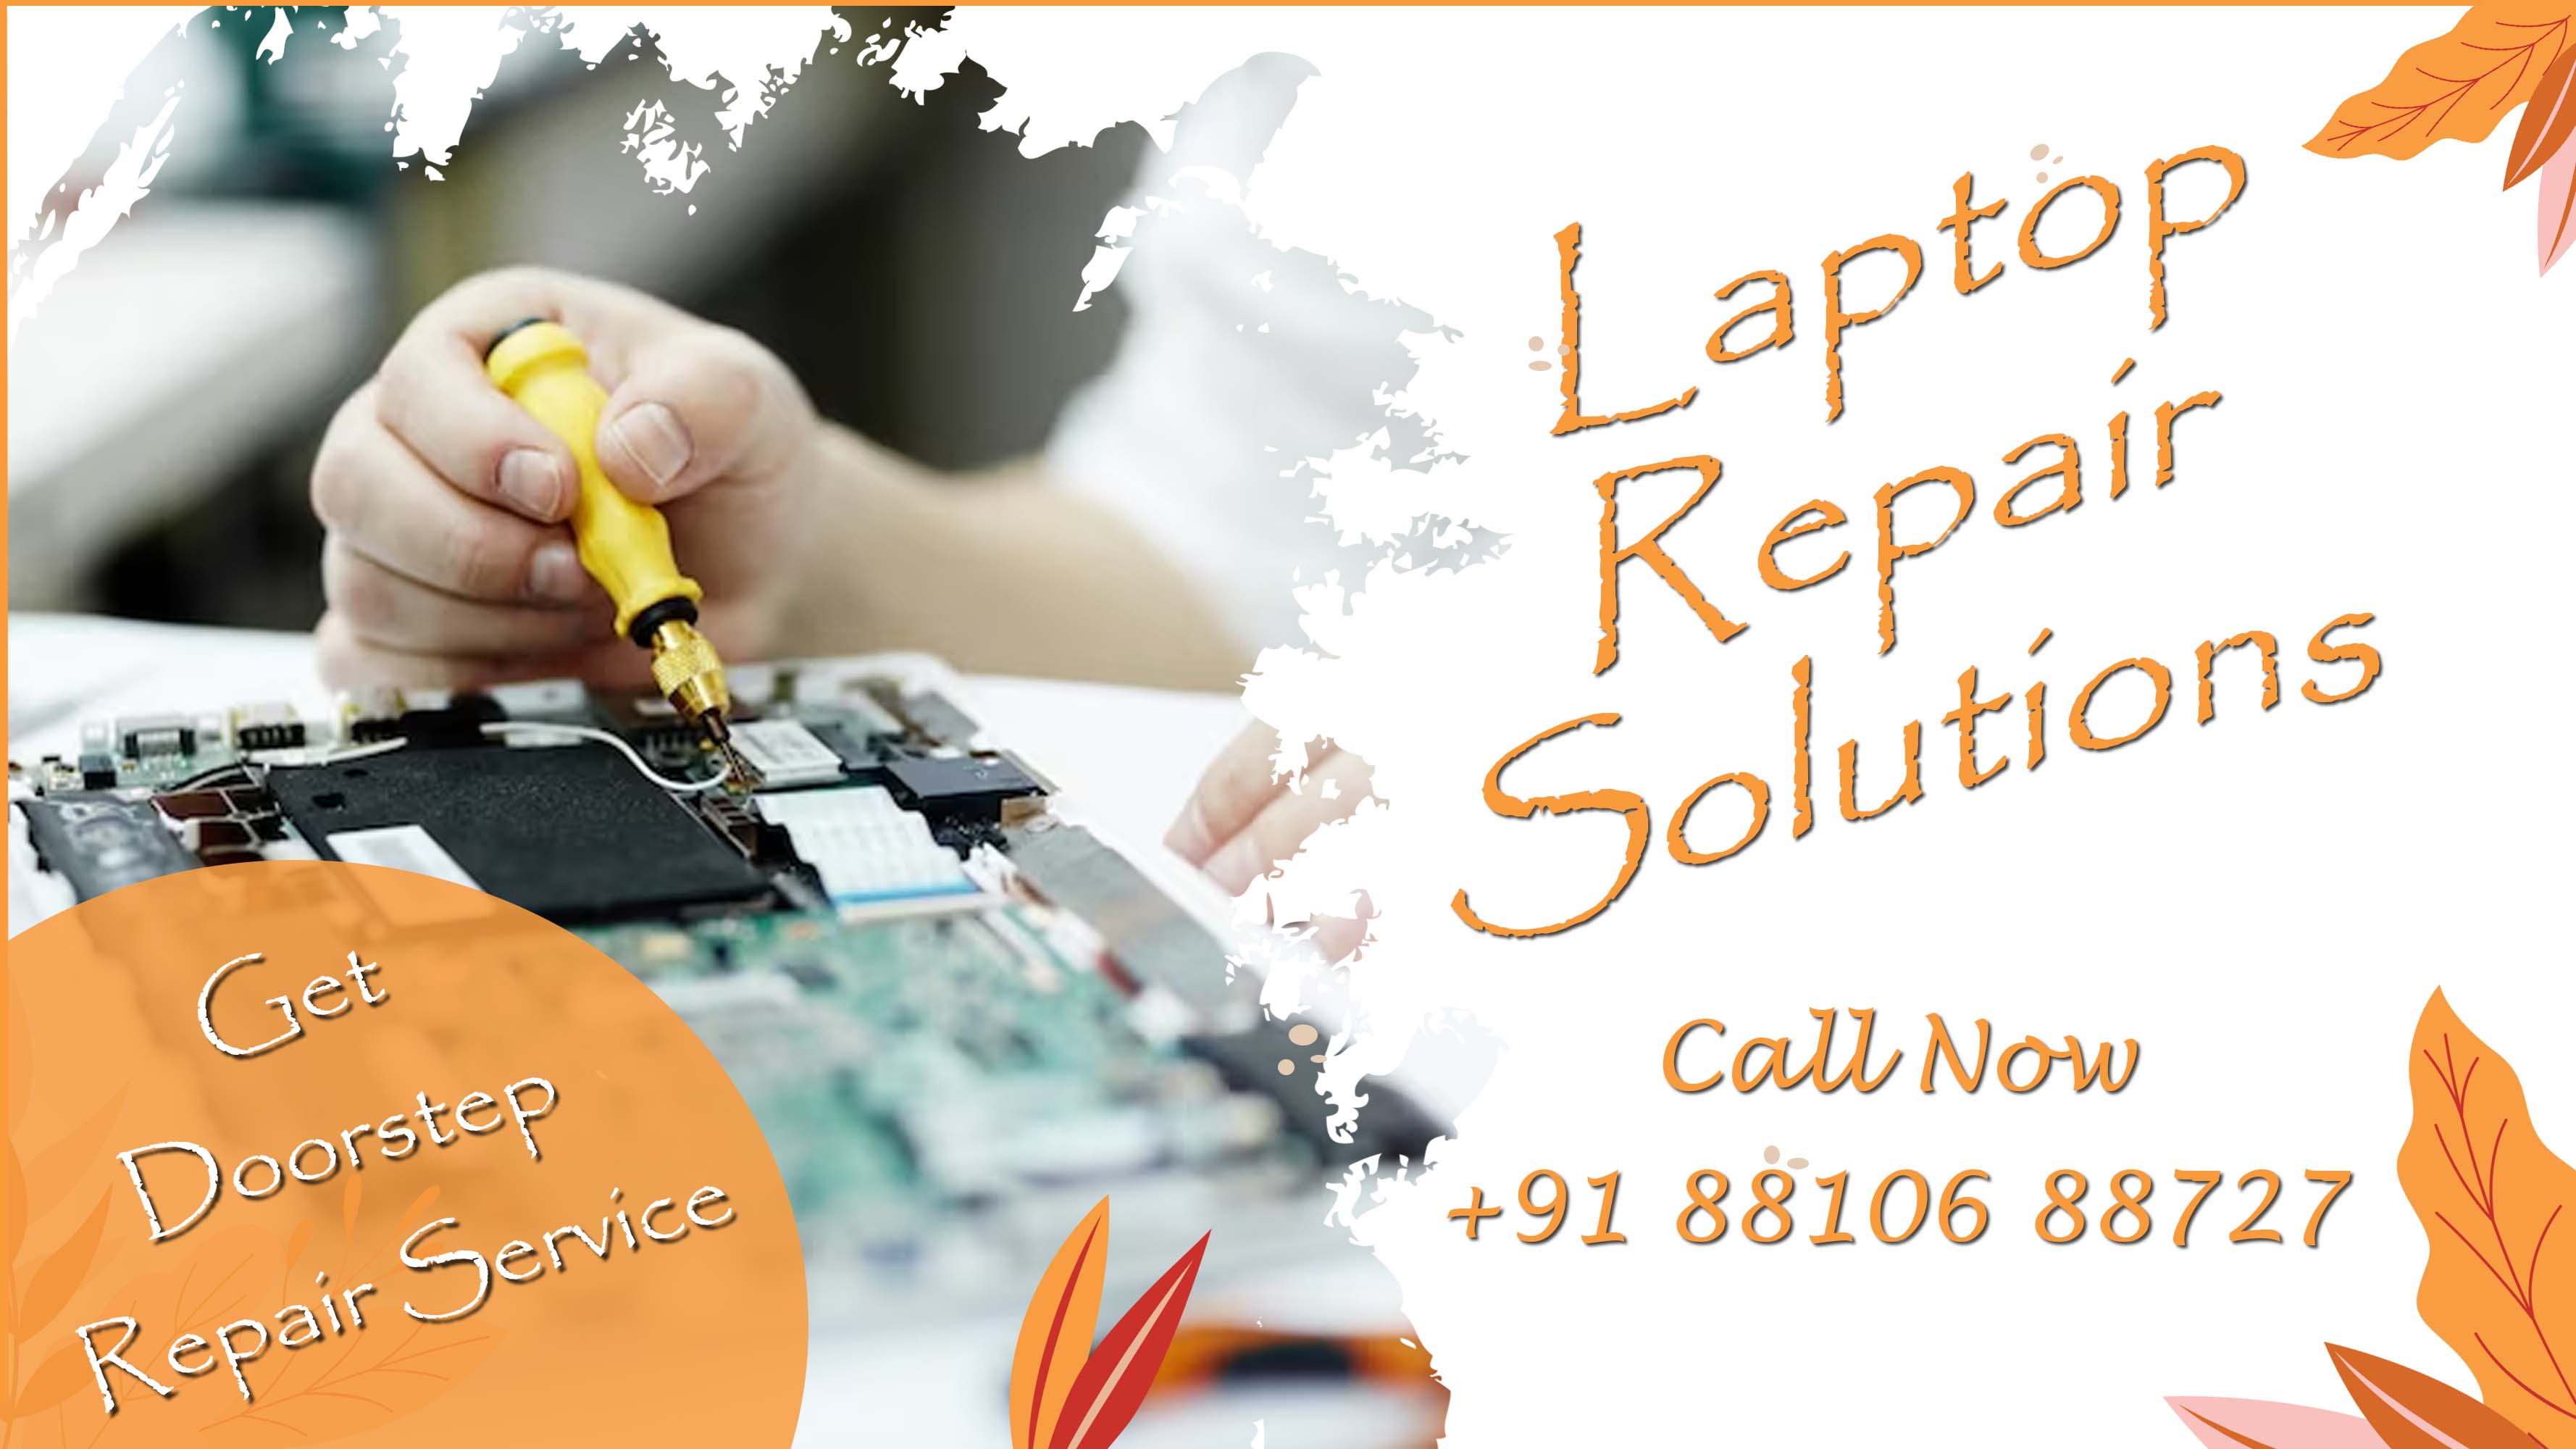 HP laptop service center in Sohna Road